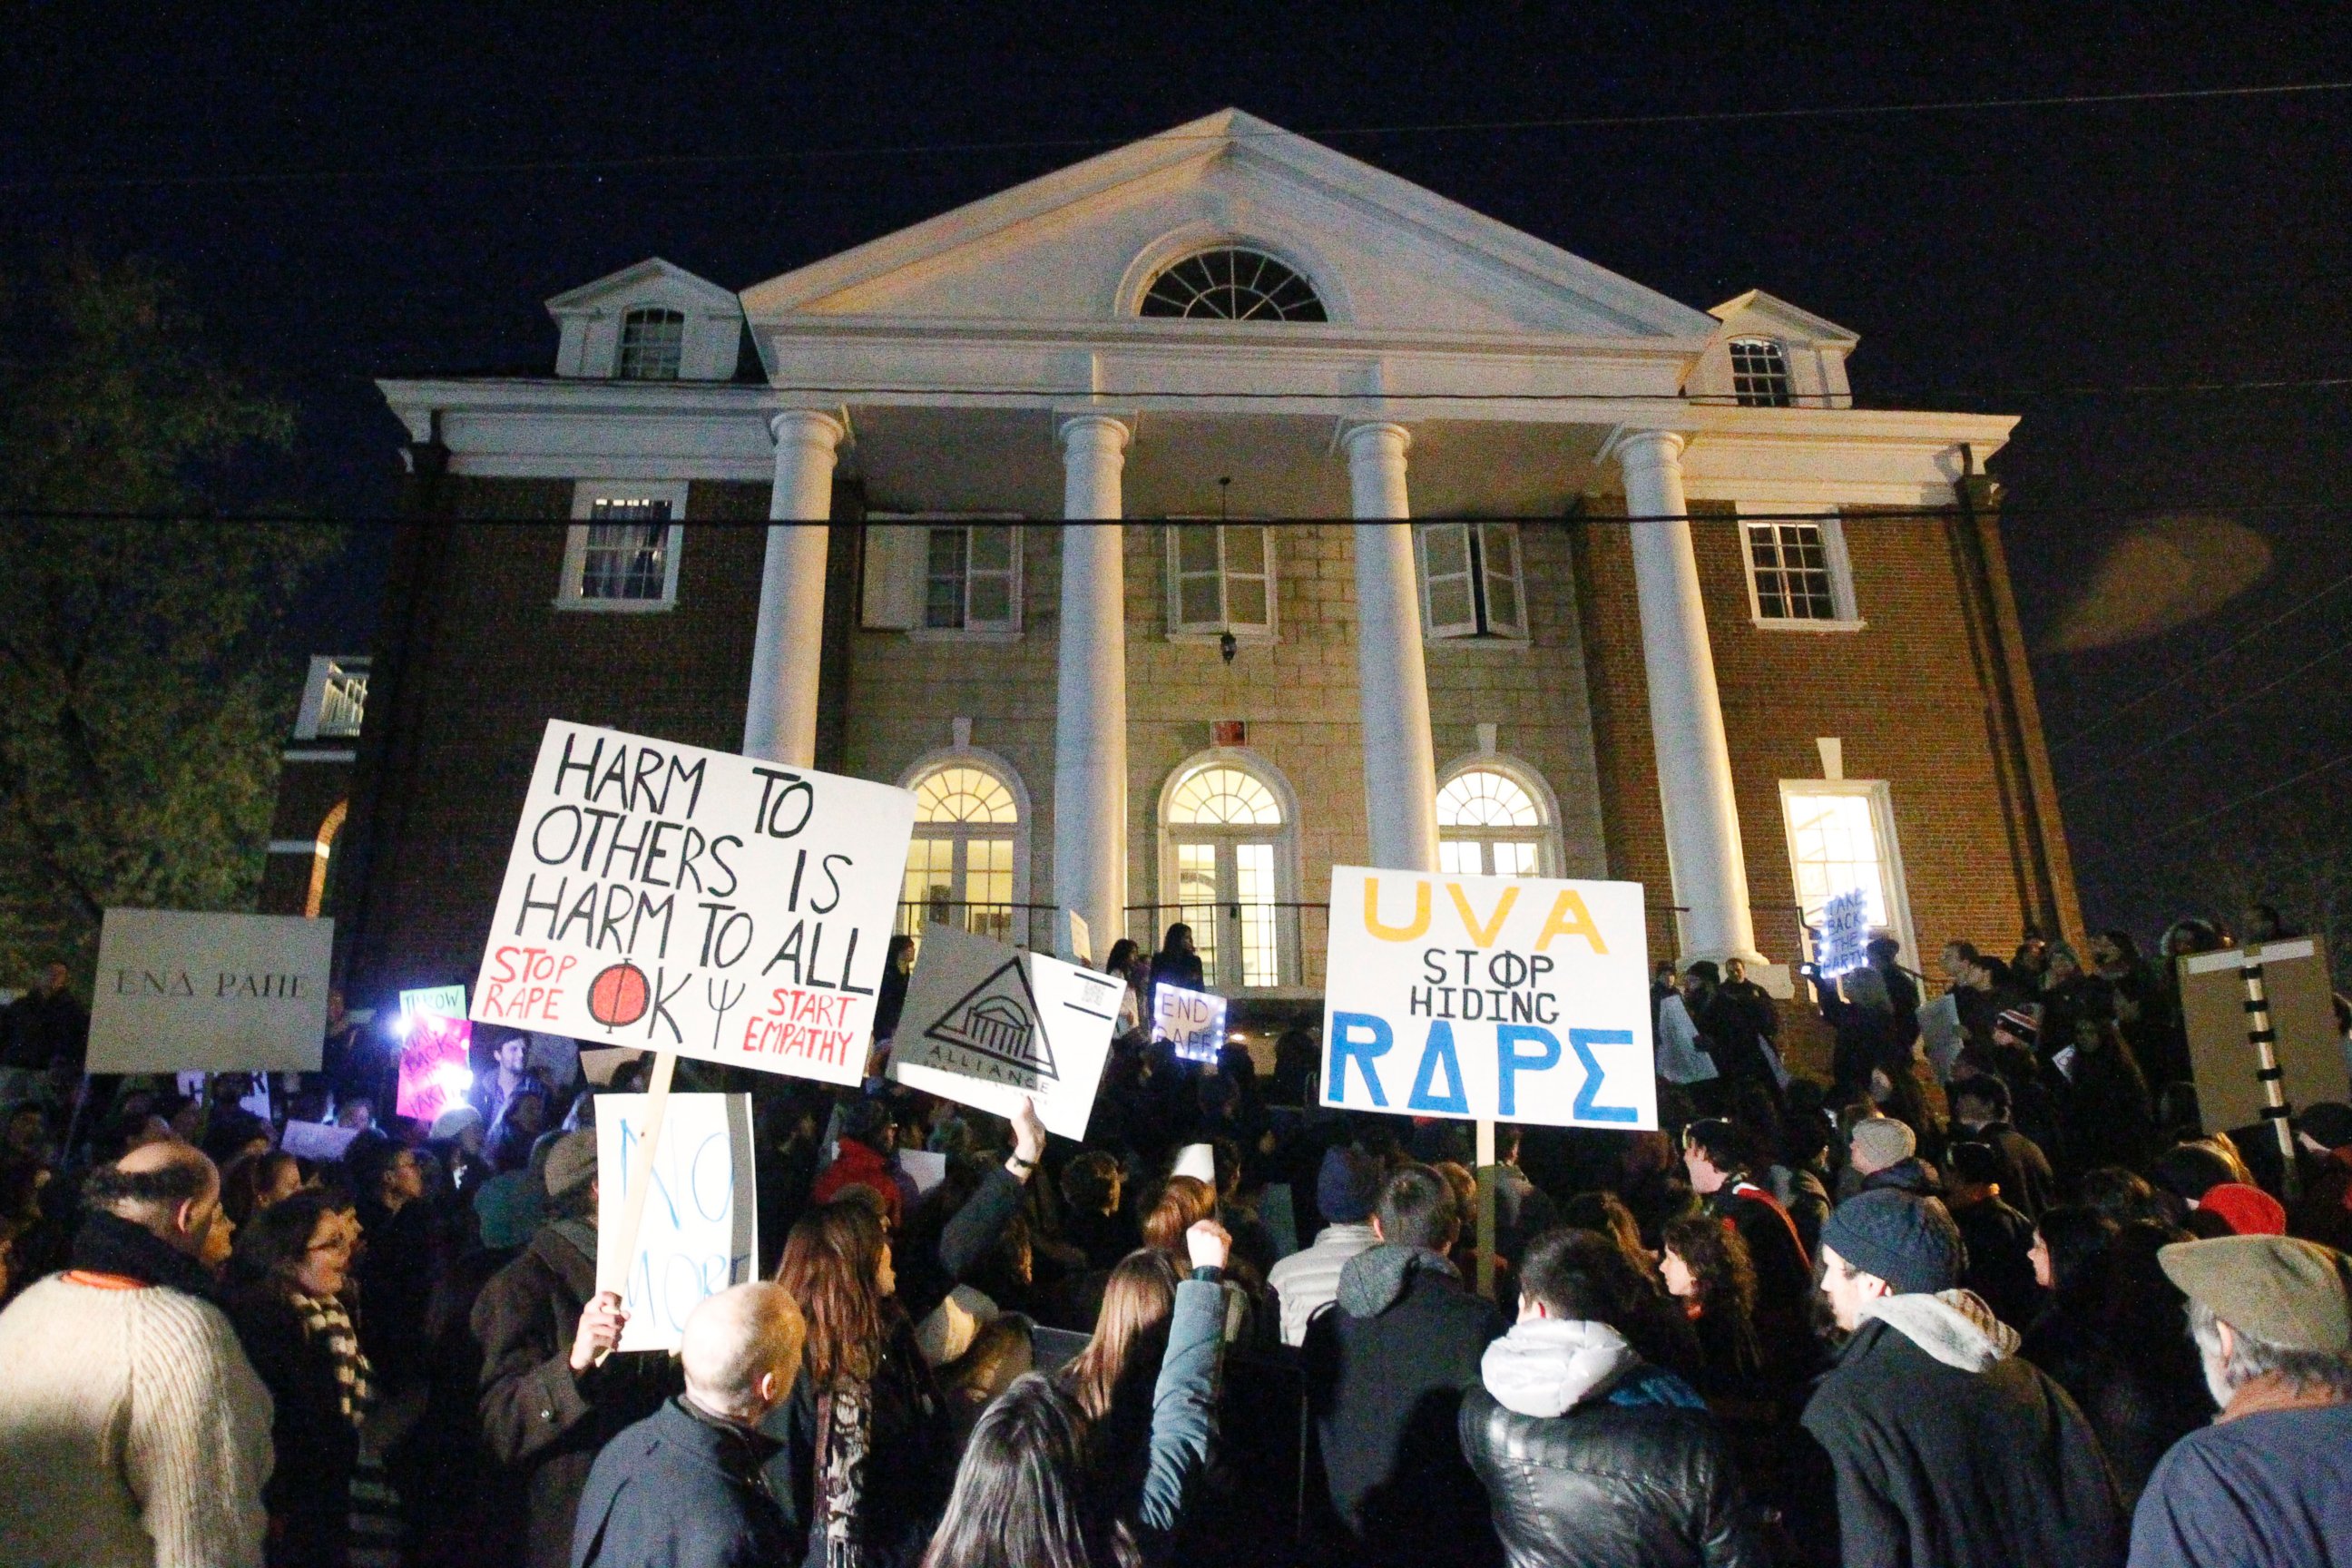 PHOTO: Protestors carry signs and chant slogans in front of the Phi Kappa Psi fraternity house at the University of Virginia, Nov. 22, 2014, in Charlottesville, Va.